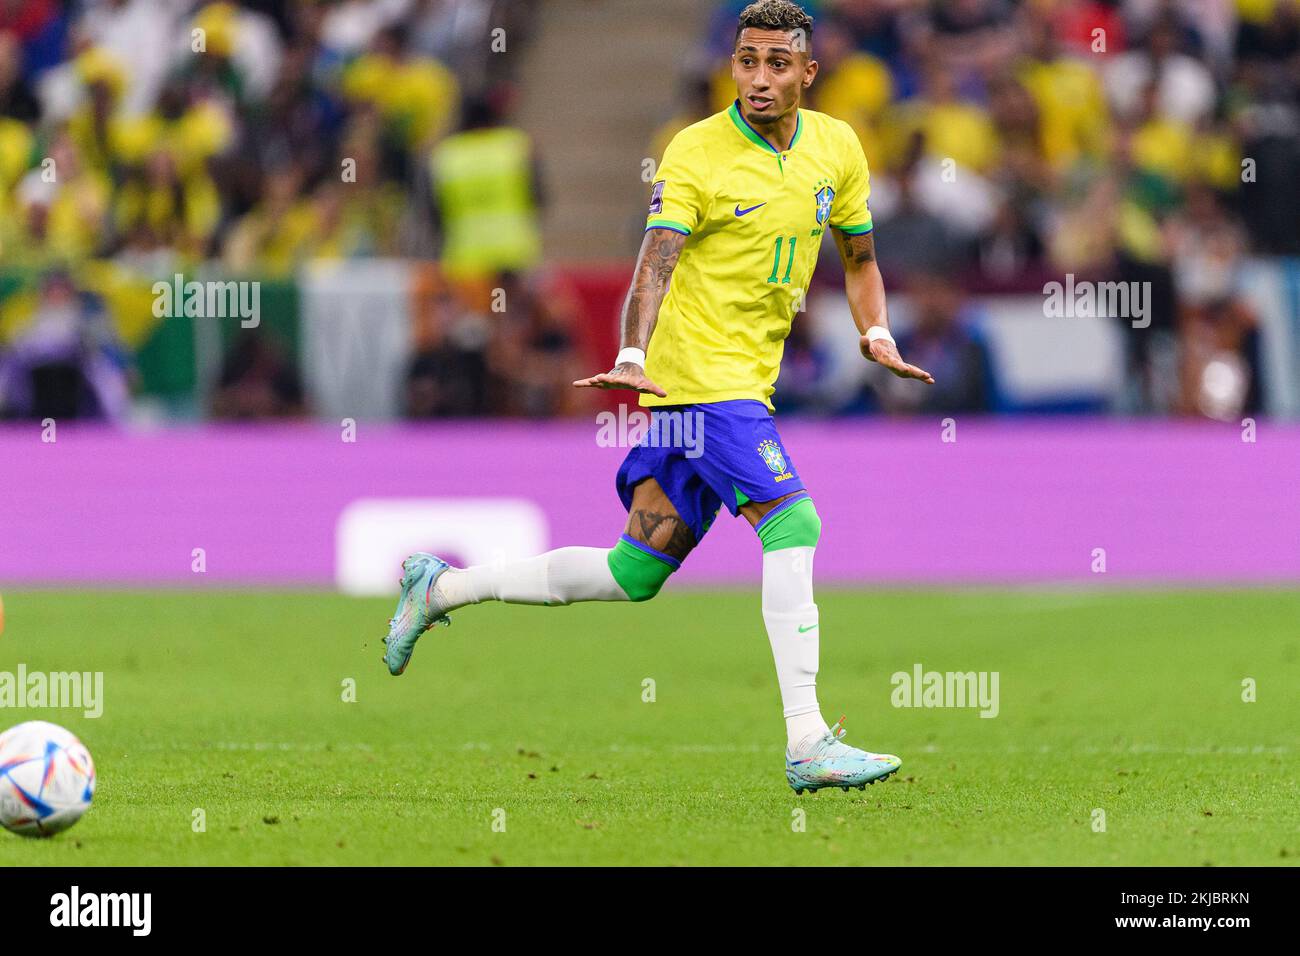 Lusail, Qatar. 24th Nov, 2022. Lusail, Qatar, Nov 25th 2022: Raphinha of Brazil during a match between Brazil vs Serbia, valid for the group stage of the World Cup, held at the Lusail National Stadium in Lusail, Qatar. (Marcio Machado/SPP) Credit: SPP Sport Press Photo. /Alamy Live News Stock Photo